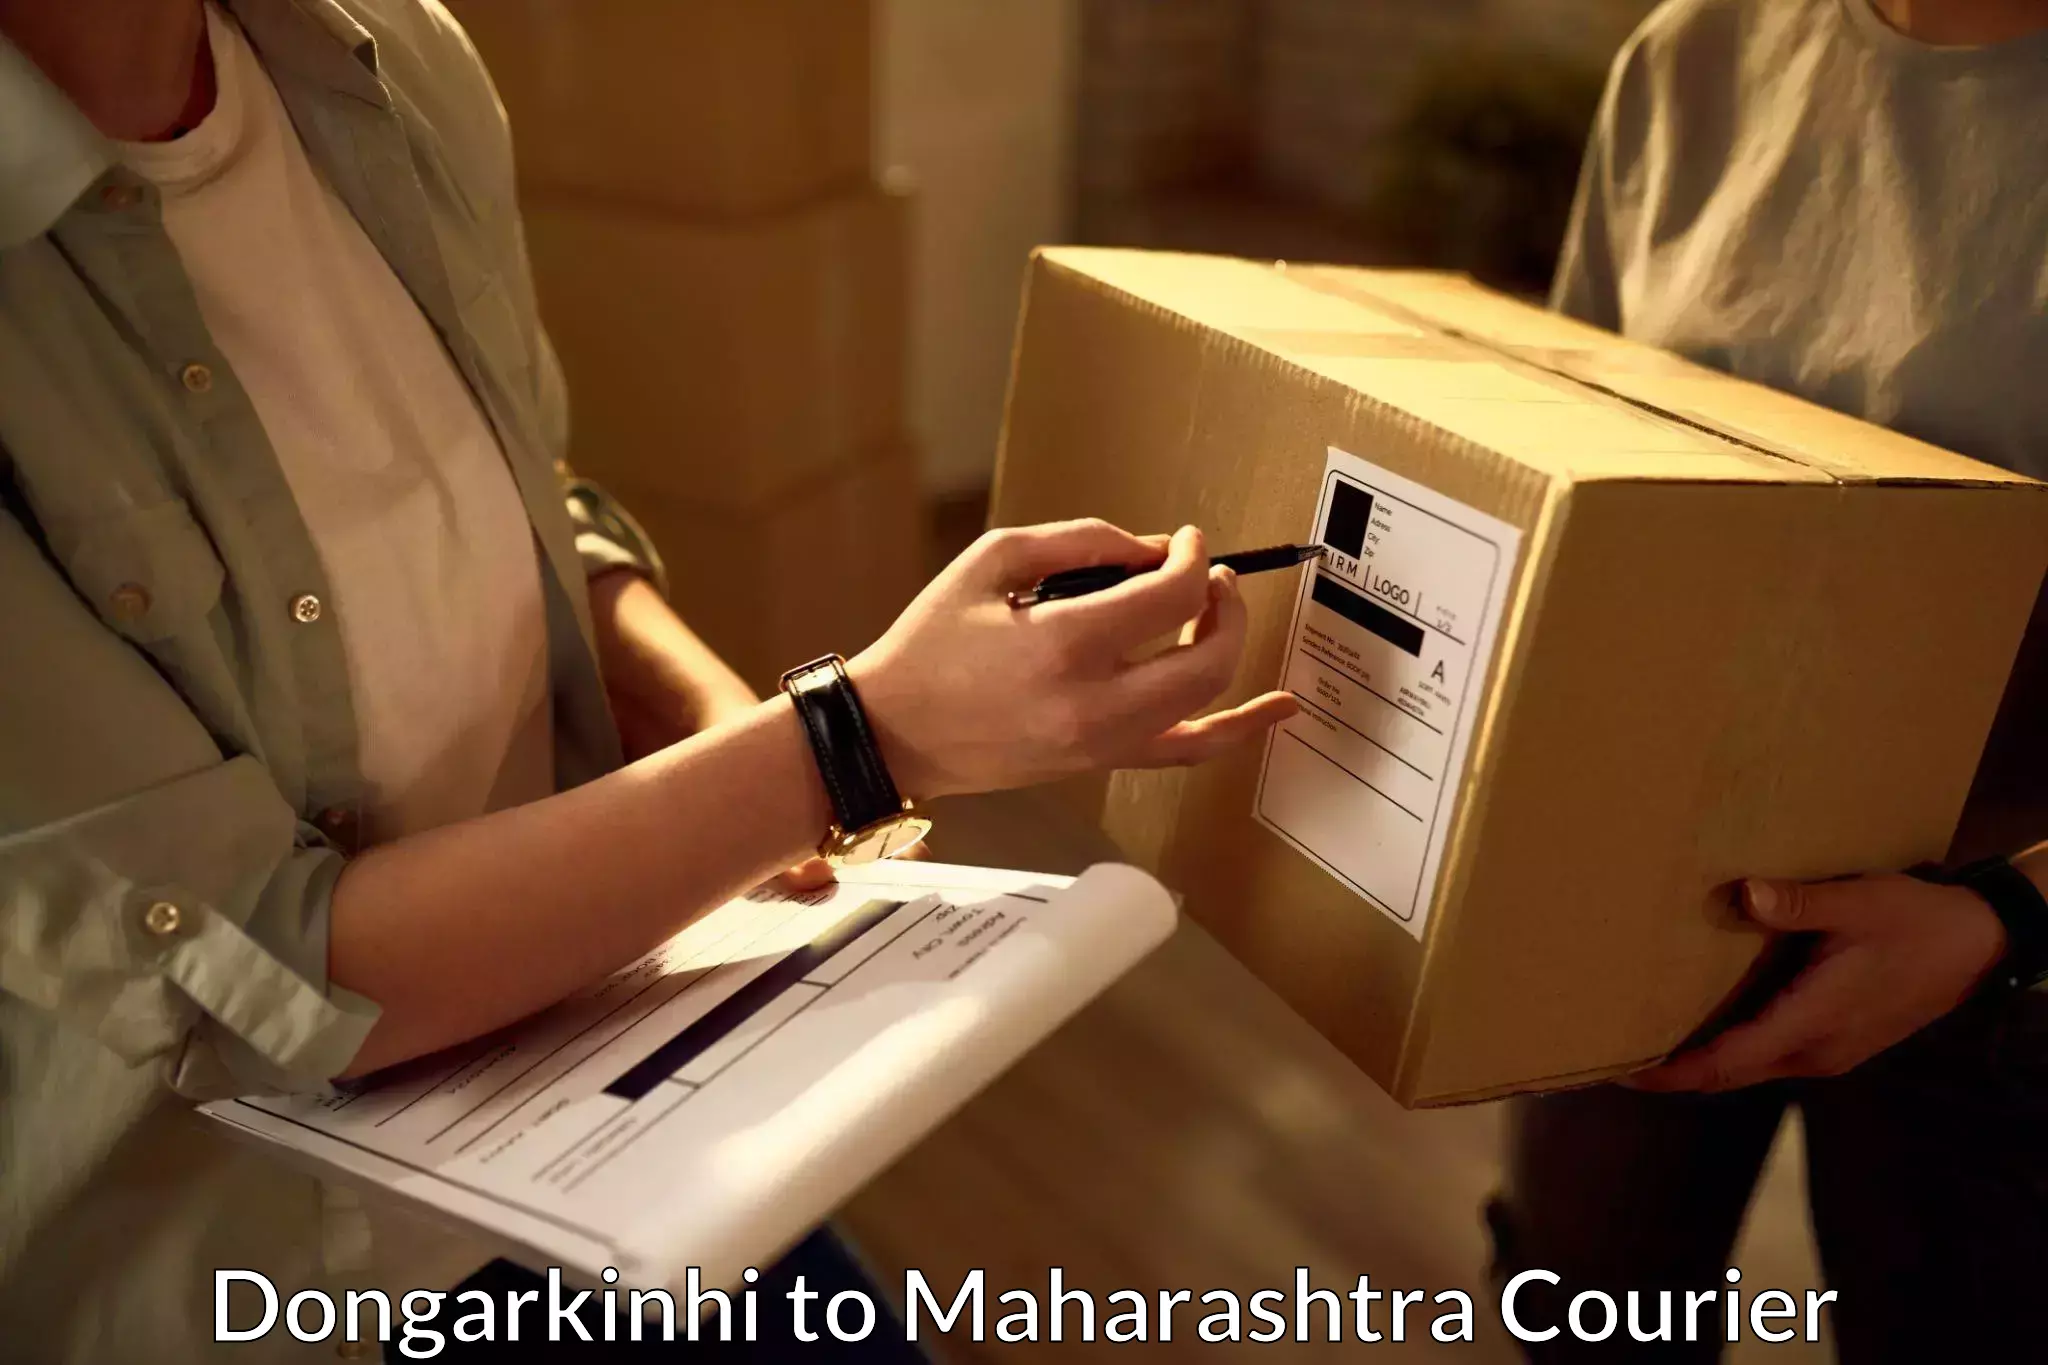 Local courier options Dongarkinhi to Andheri